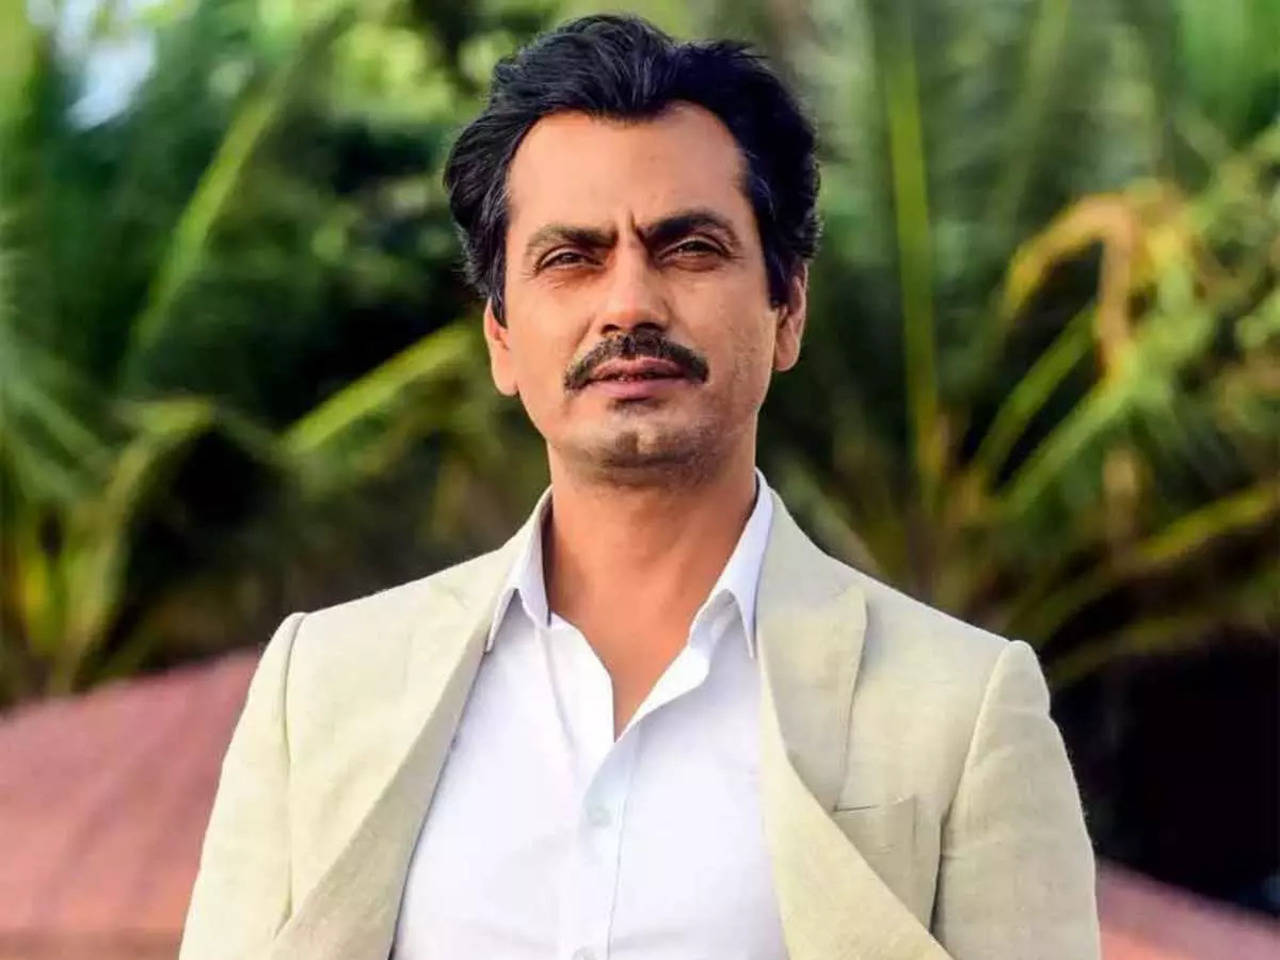 When Nawazuddin Siddiqui was dragged out by collar on movie set 